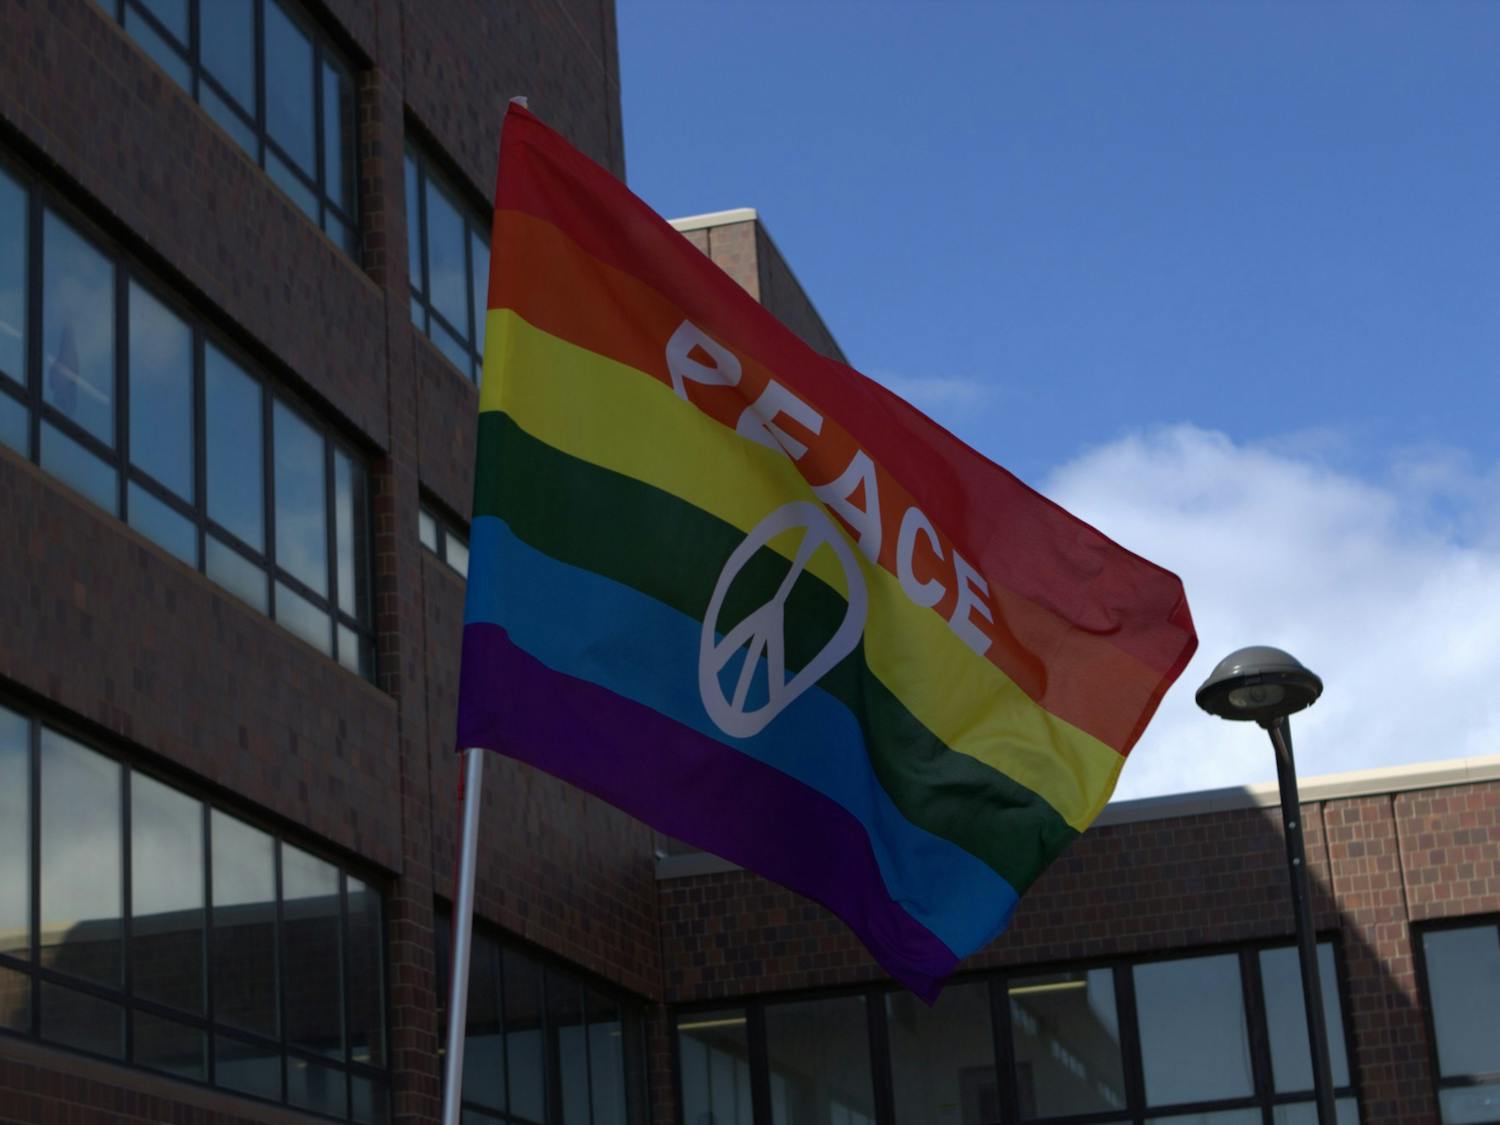 A student displays a “Peace” flag during a campus Gay Pride Parade in April 2019.